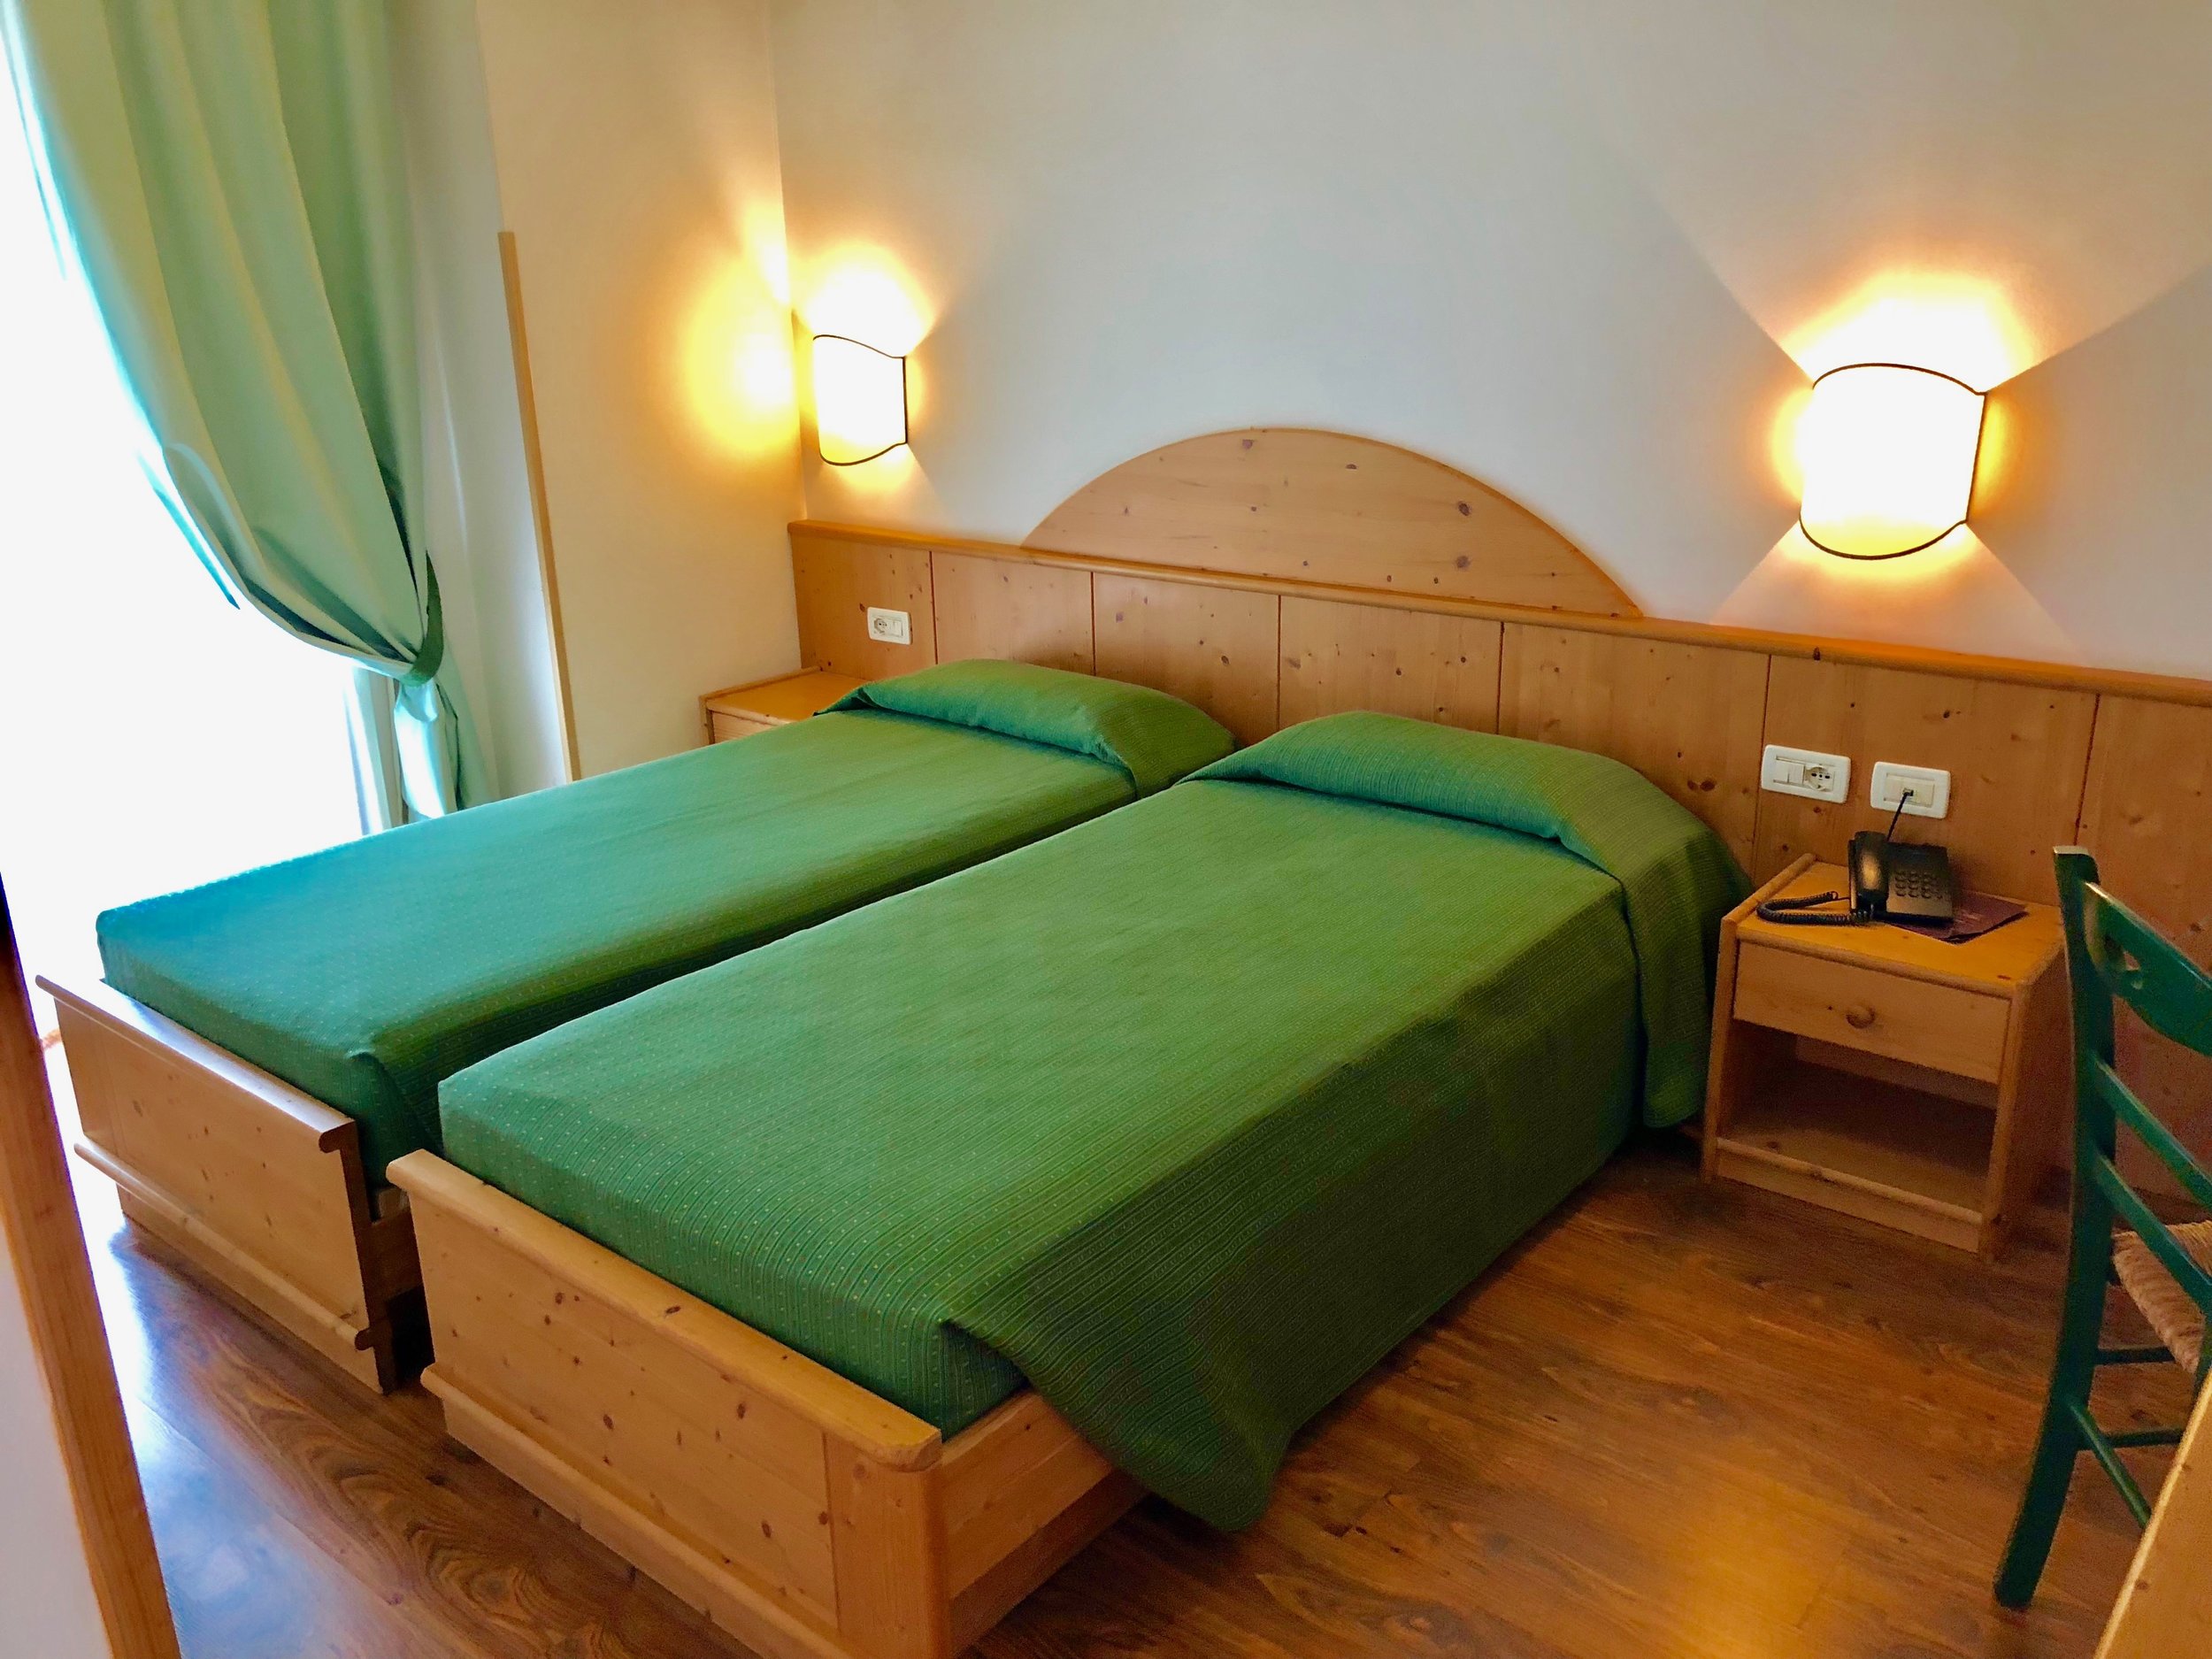 Clean, comfortable rooms at the Hotel Relais (Relax)